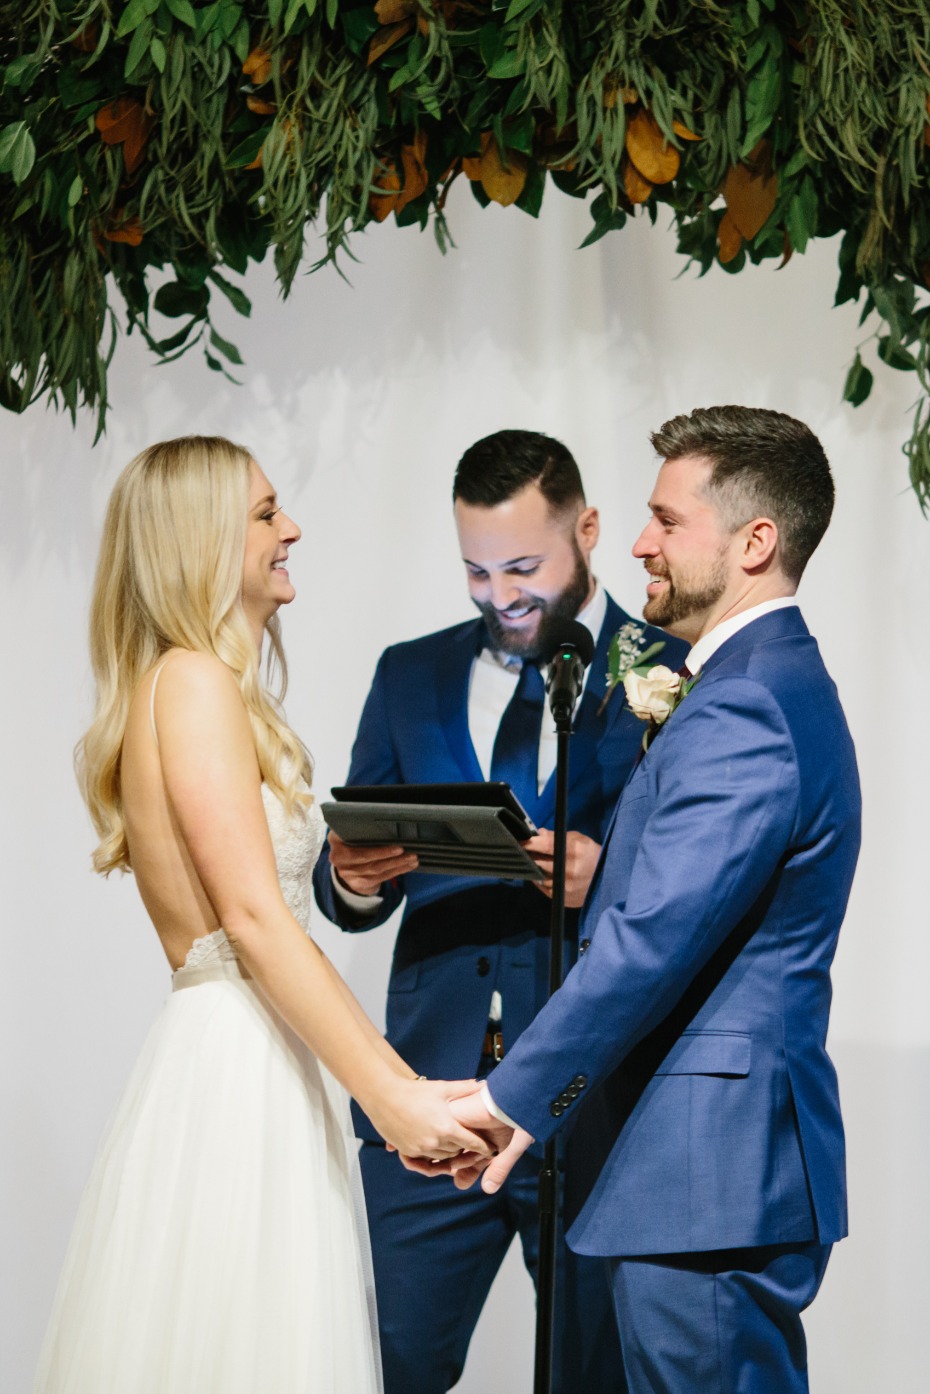 Kayla Cummings Getting Married to Husband Griffin